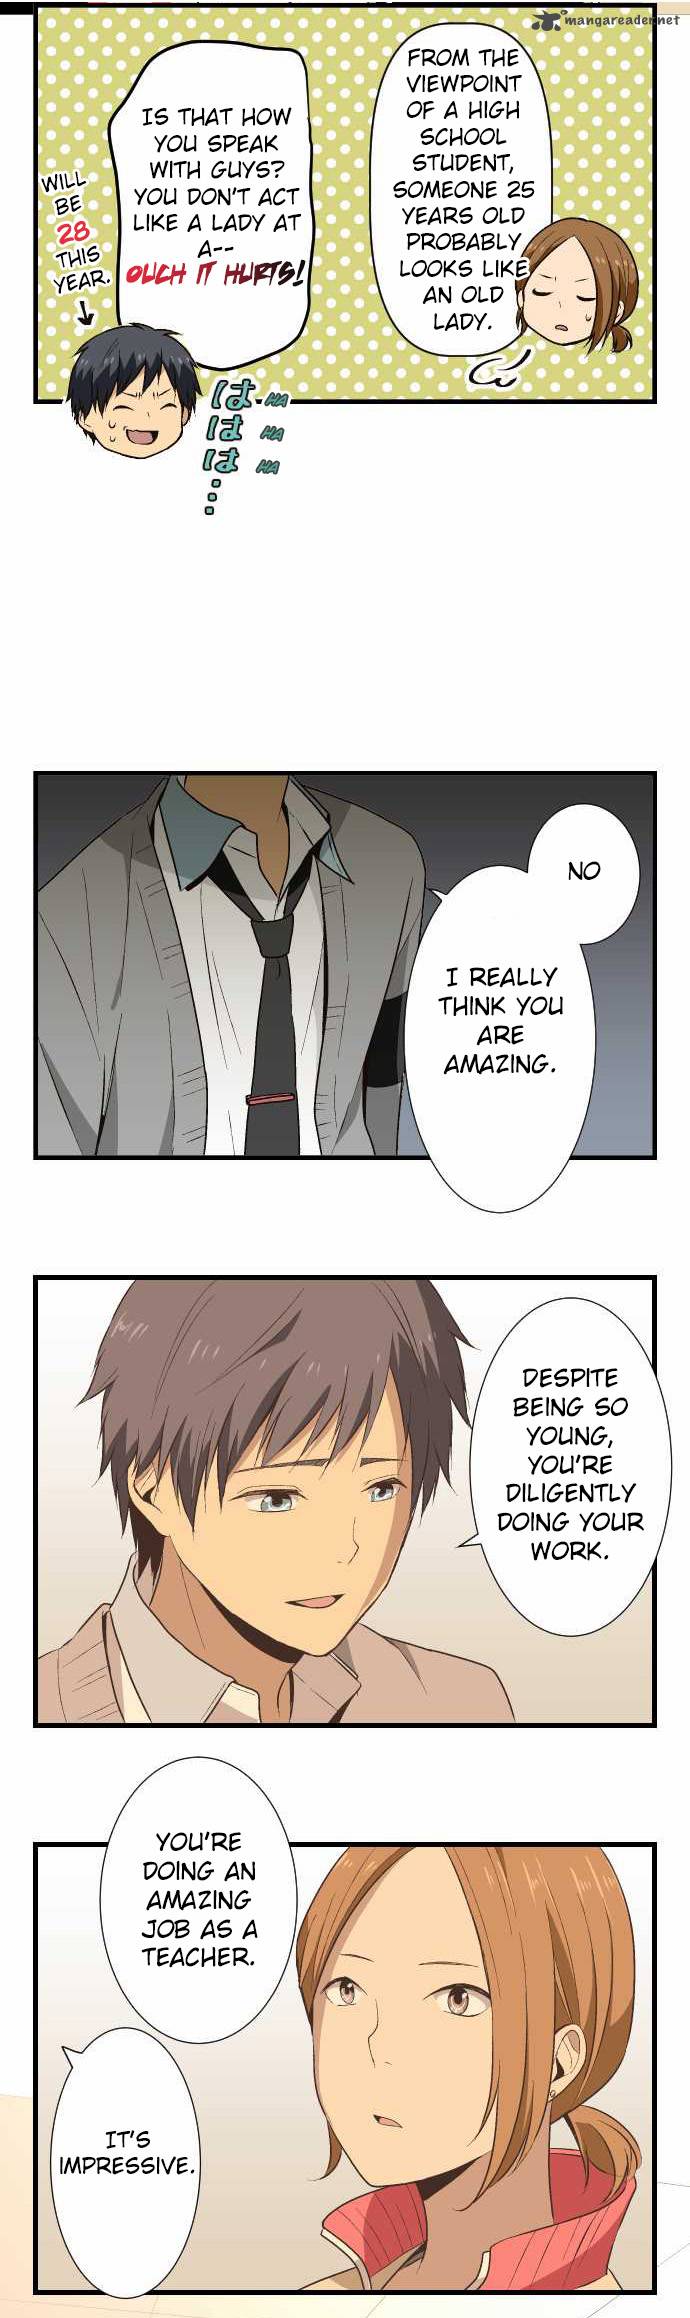 relife_16_5